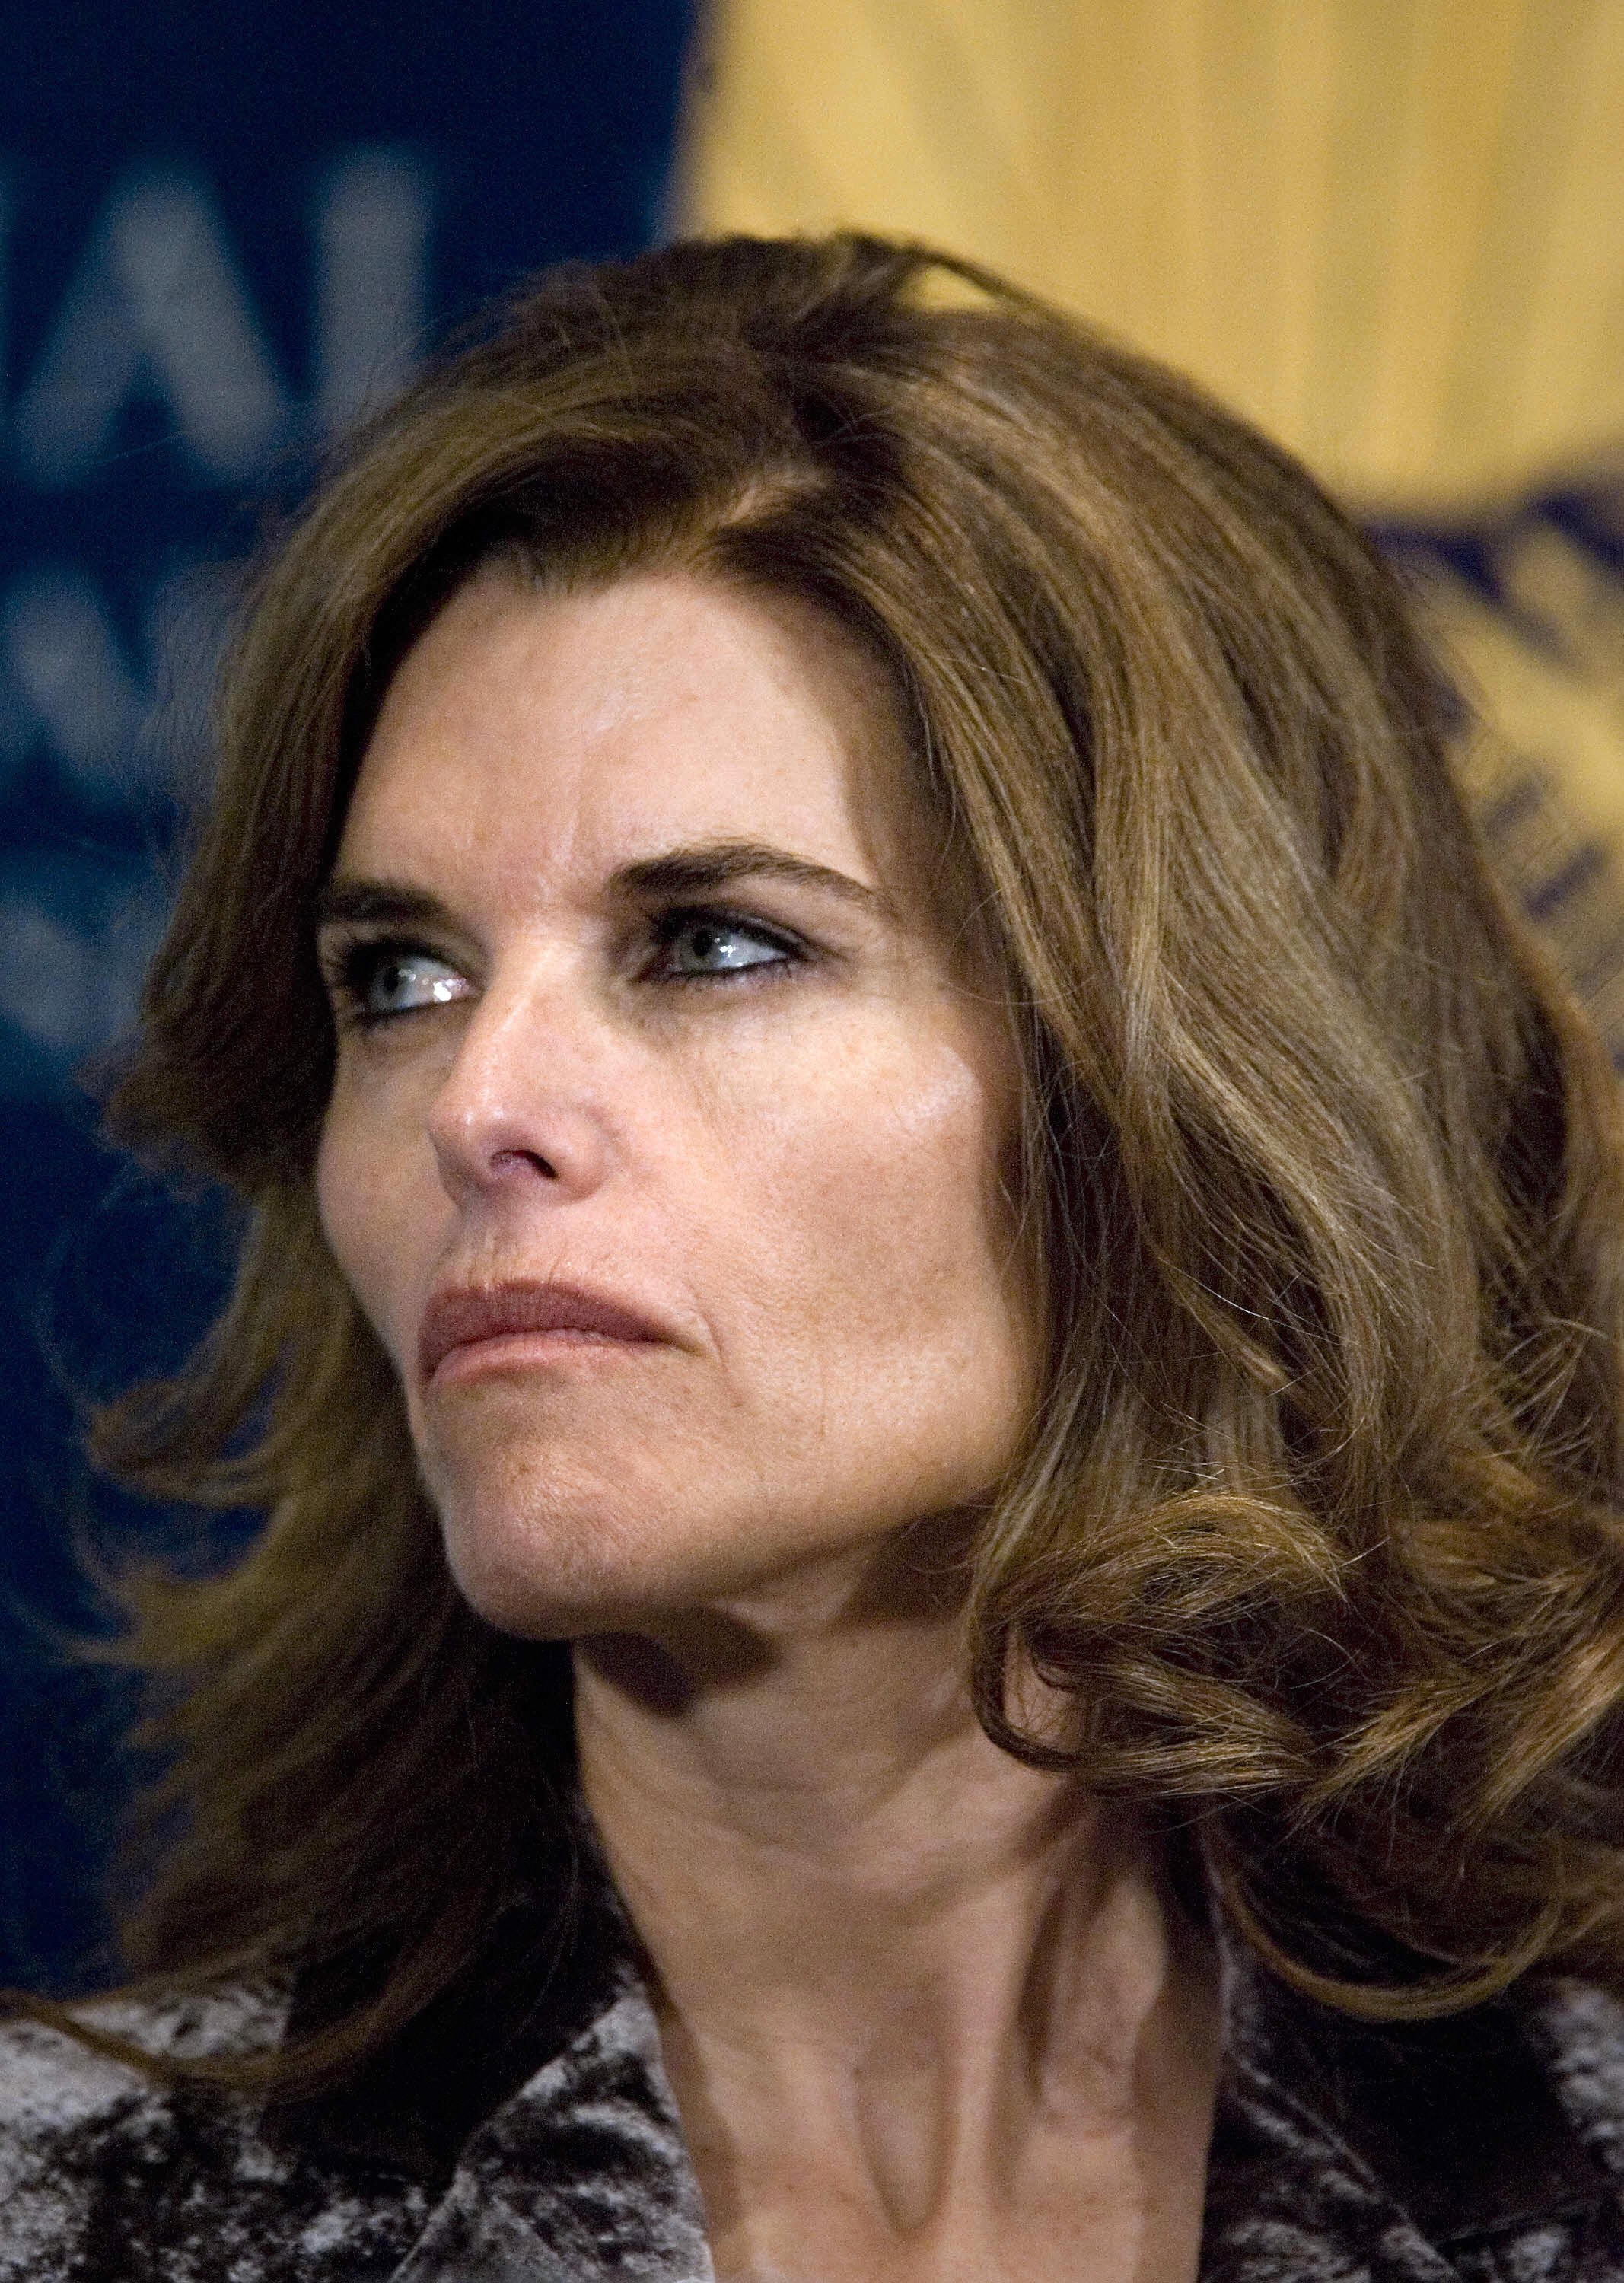 Maria Shriver, the wife of California Governor Arnold Schwarzenegger, looks over while he speaks at the National Press Club 26 February 2007 in Washington, DC. | Source: Getty Images